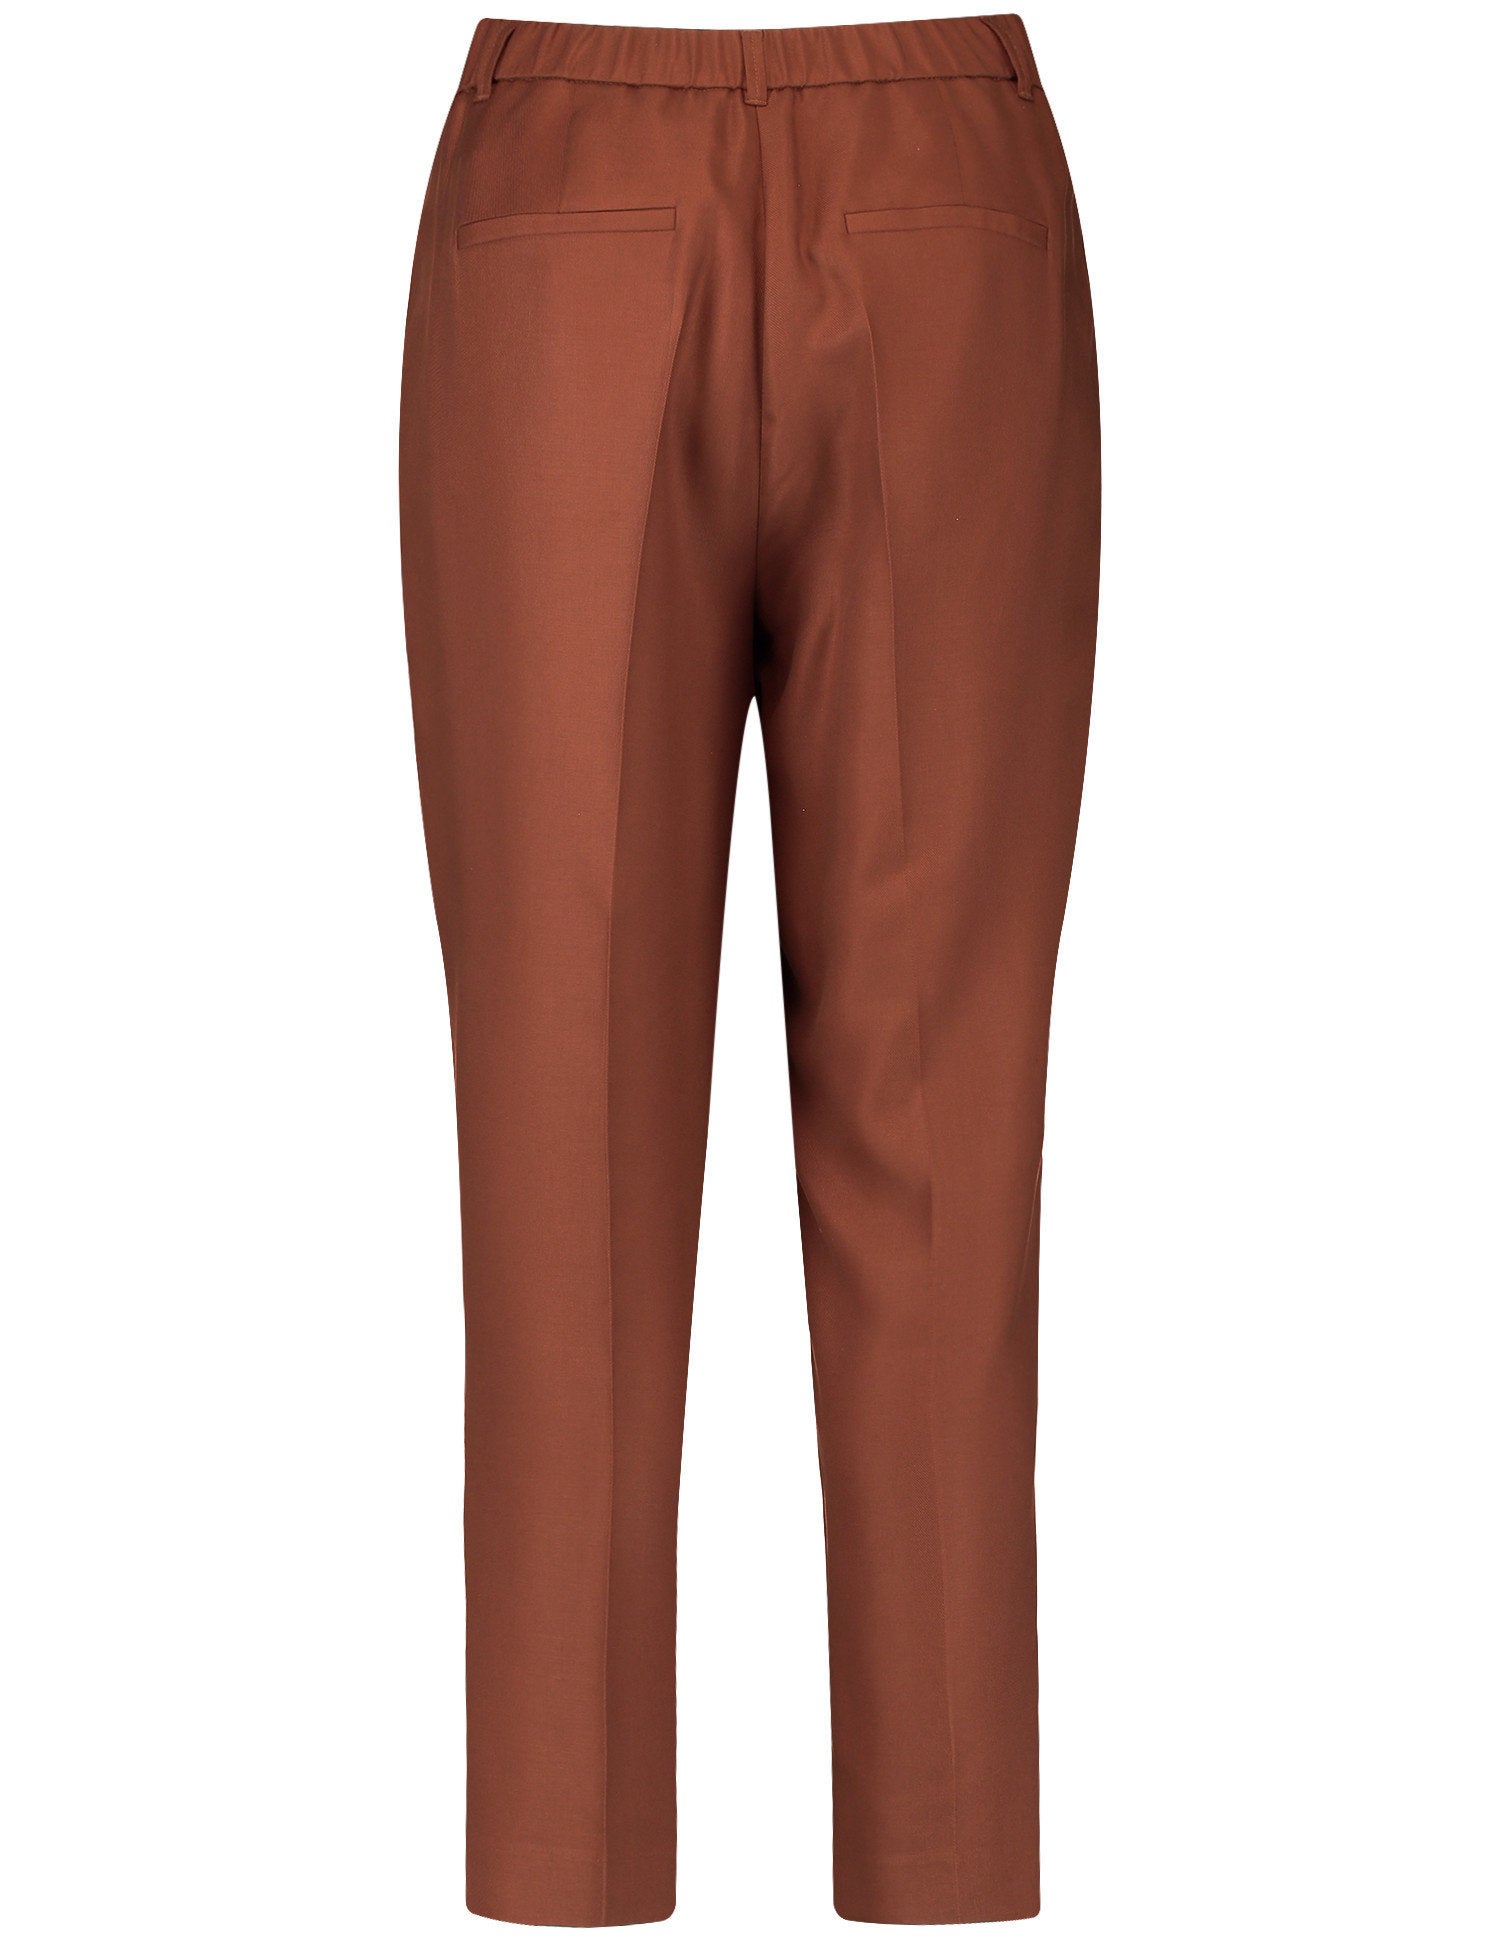 7/8 Length Trousers With An Elasticated Waistband On The Back_220006-31211_60703_03